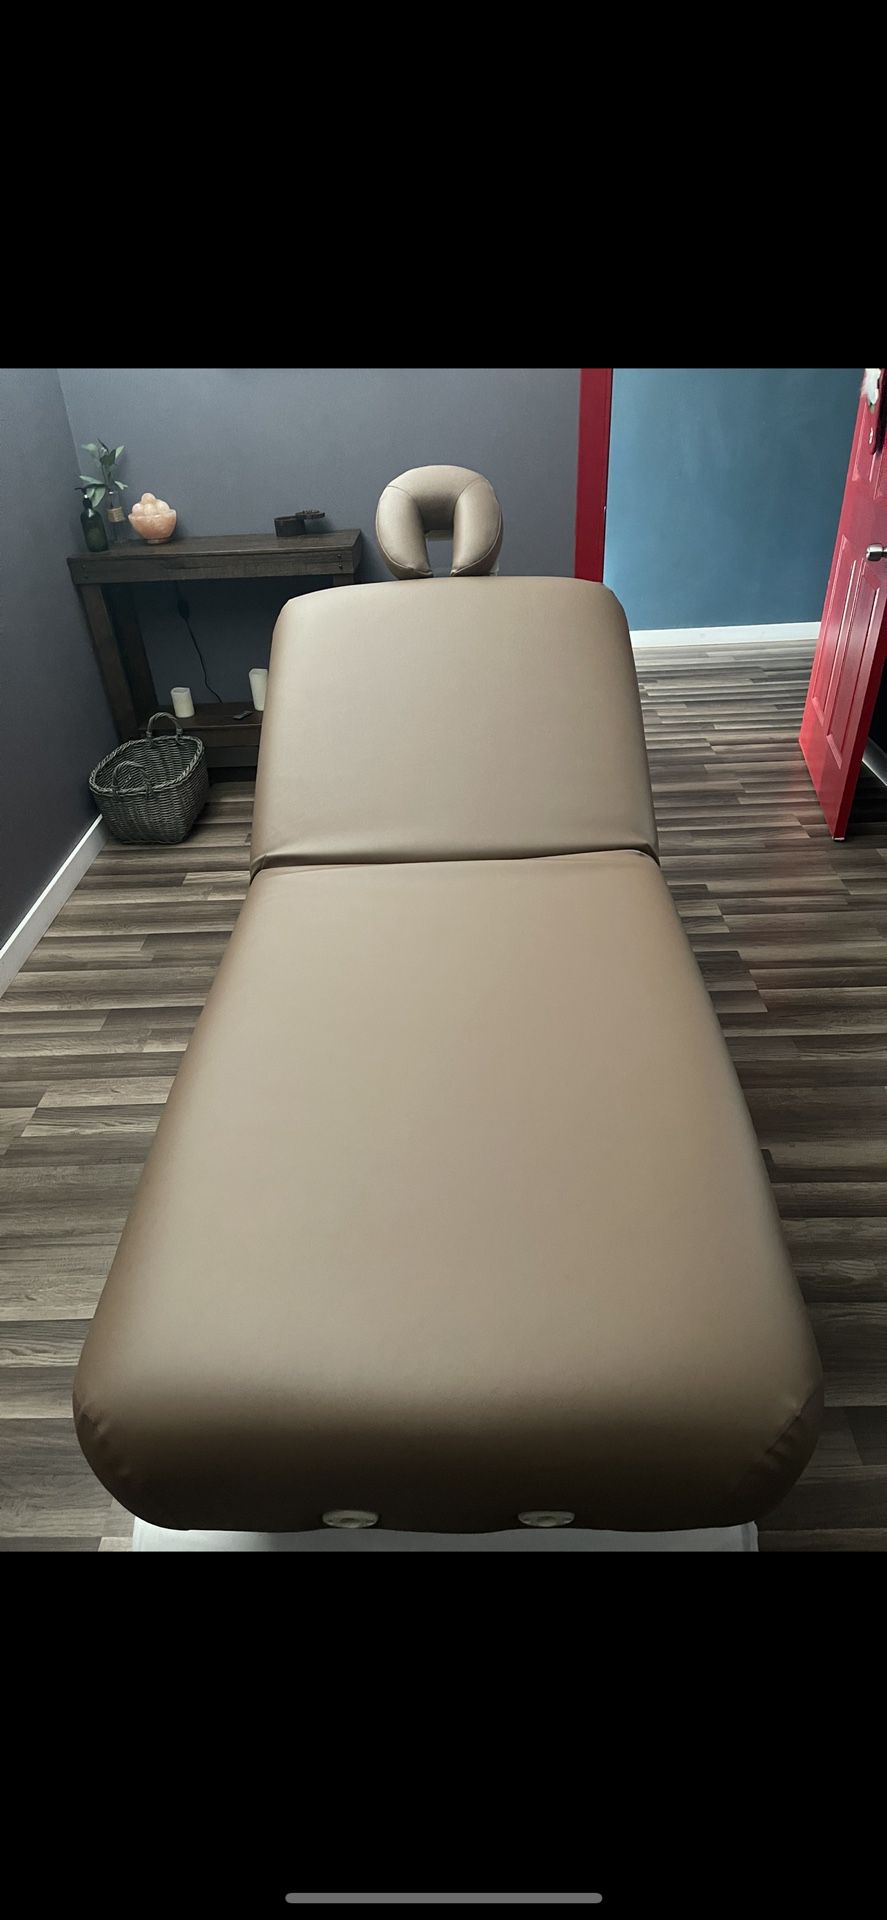 Electric Medical Spa Treatment Table (Facial Chair/Bed)